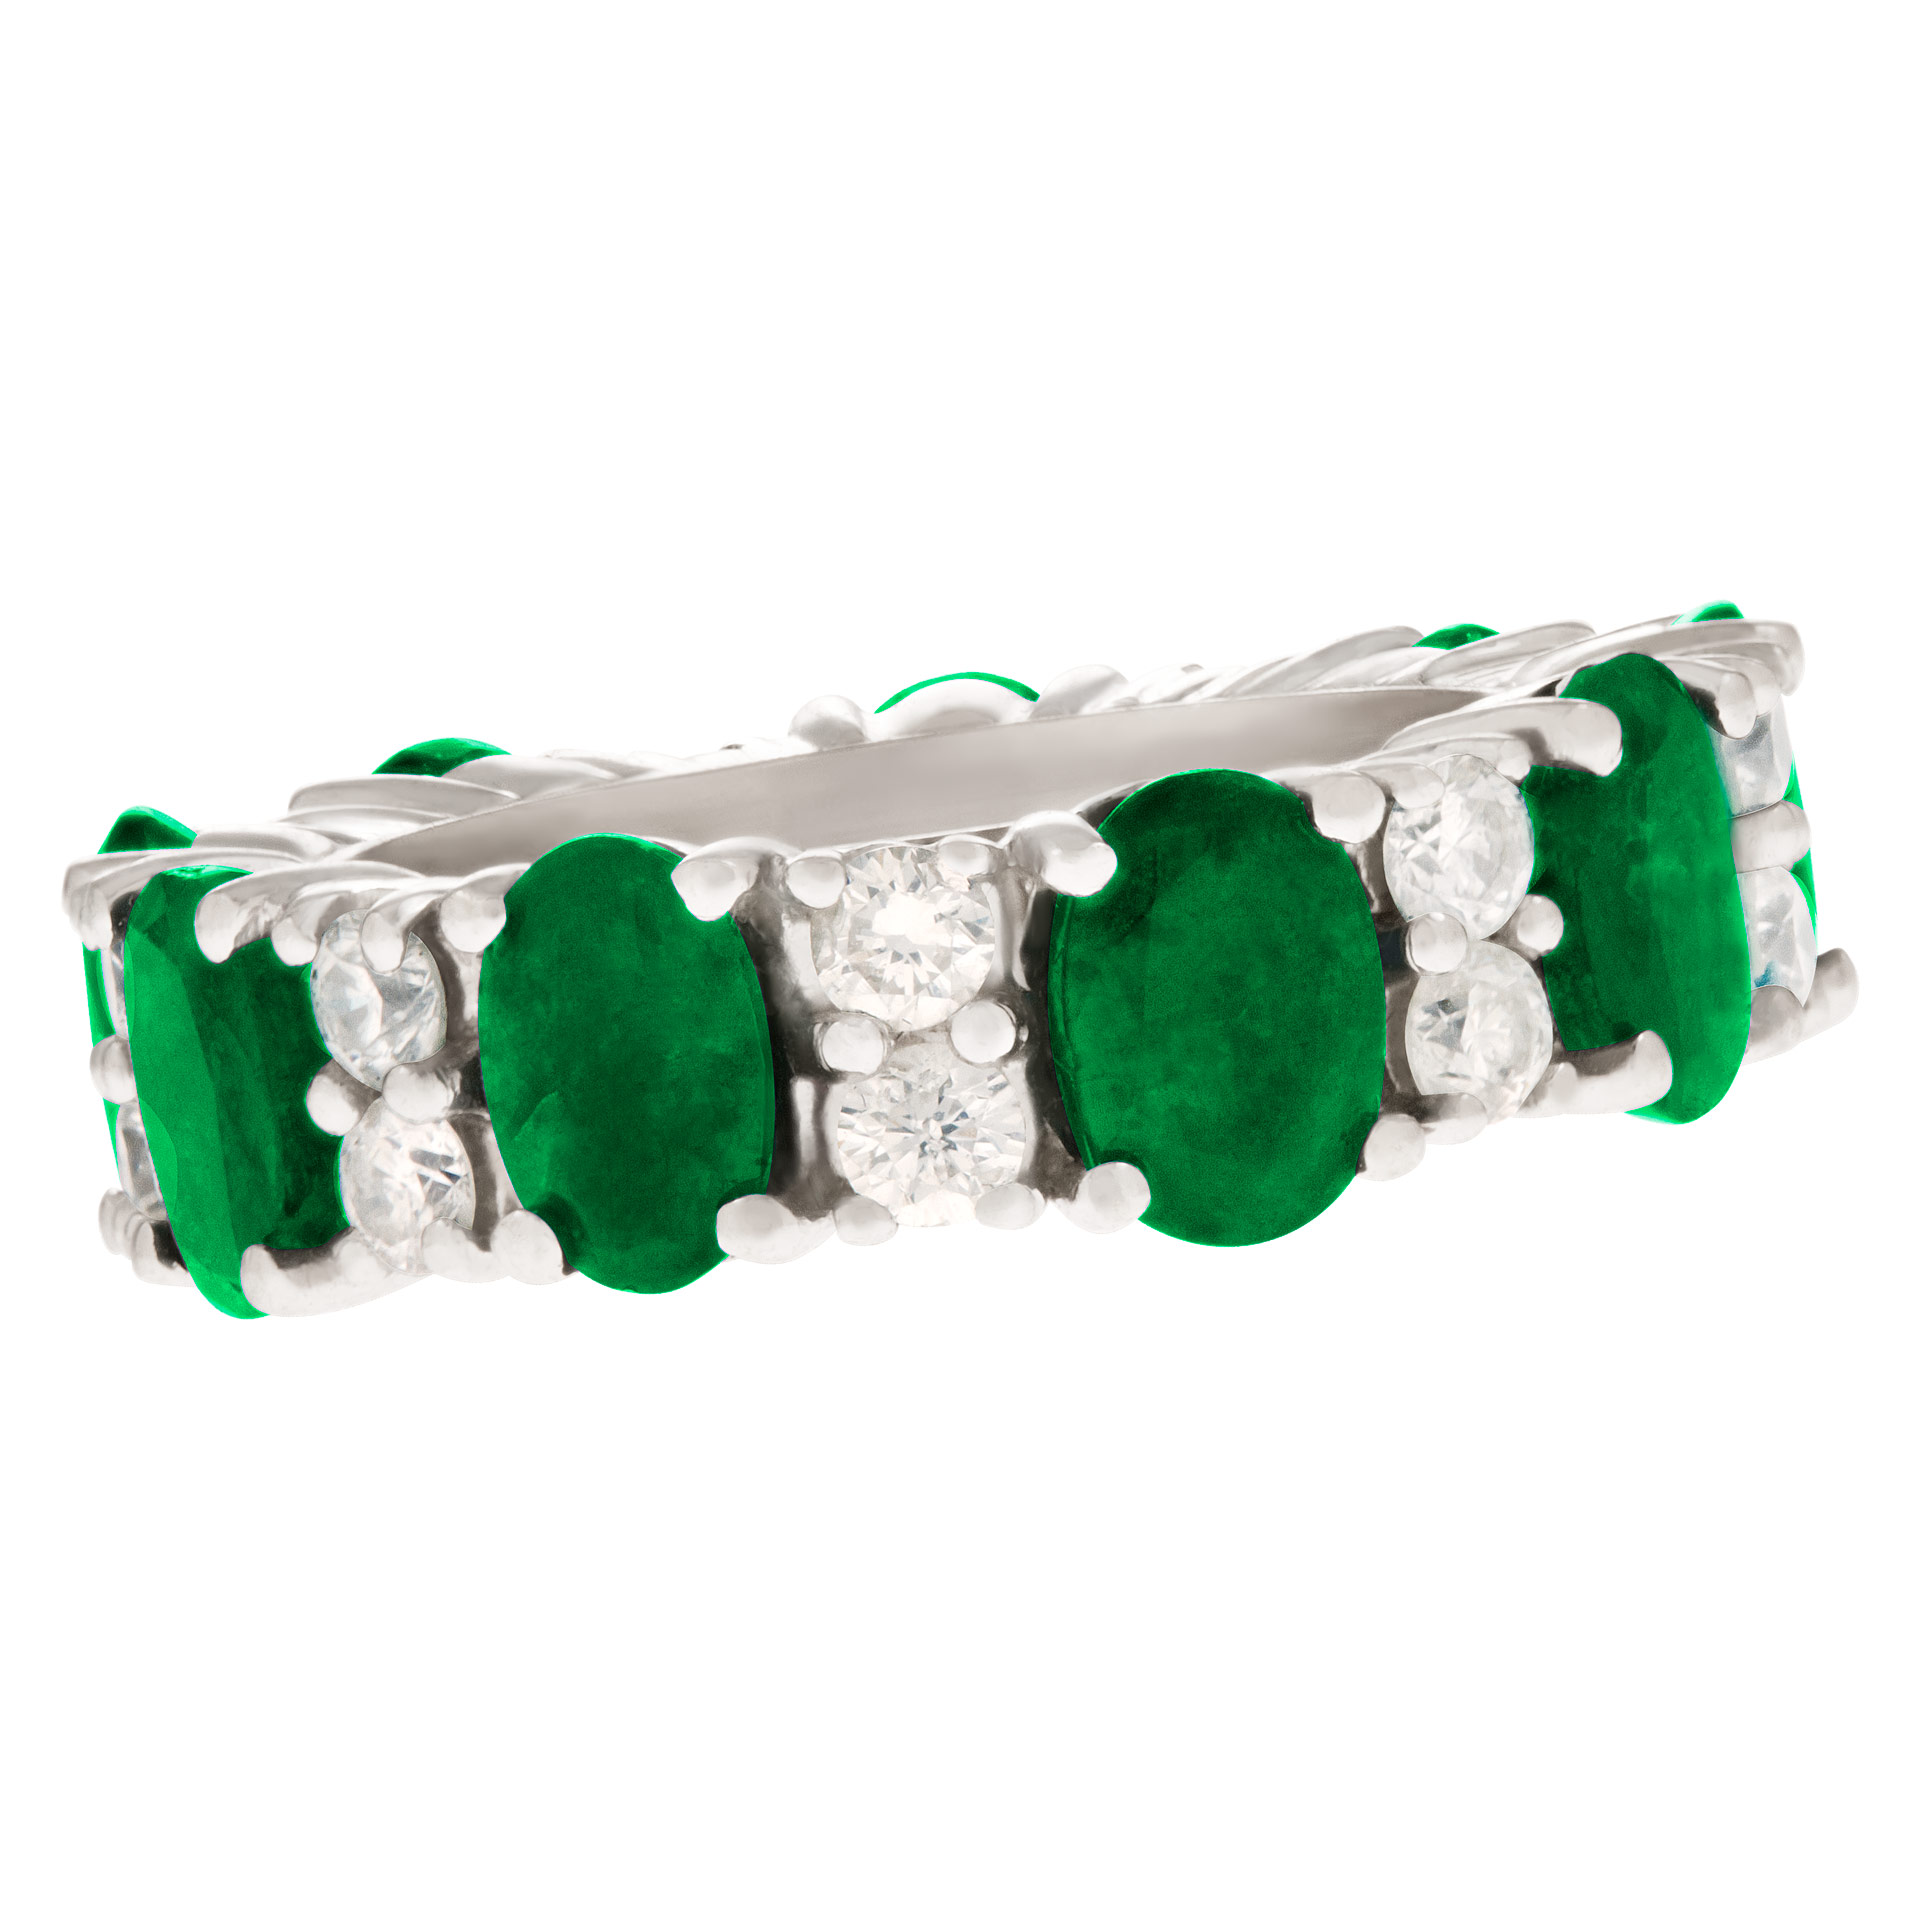 Eternity band in 18k white gold with emeralds & diamonds. Size 4.5